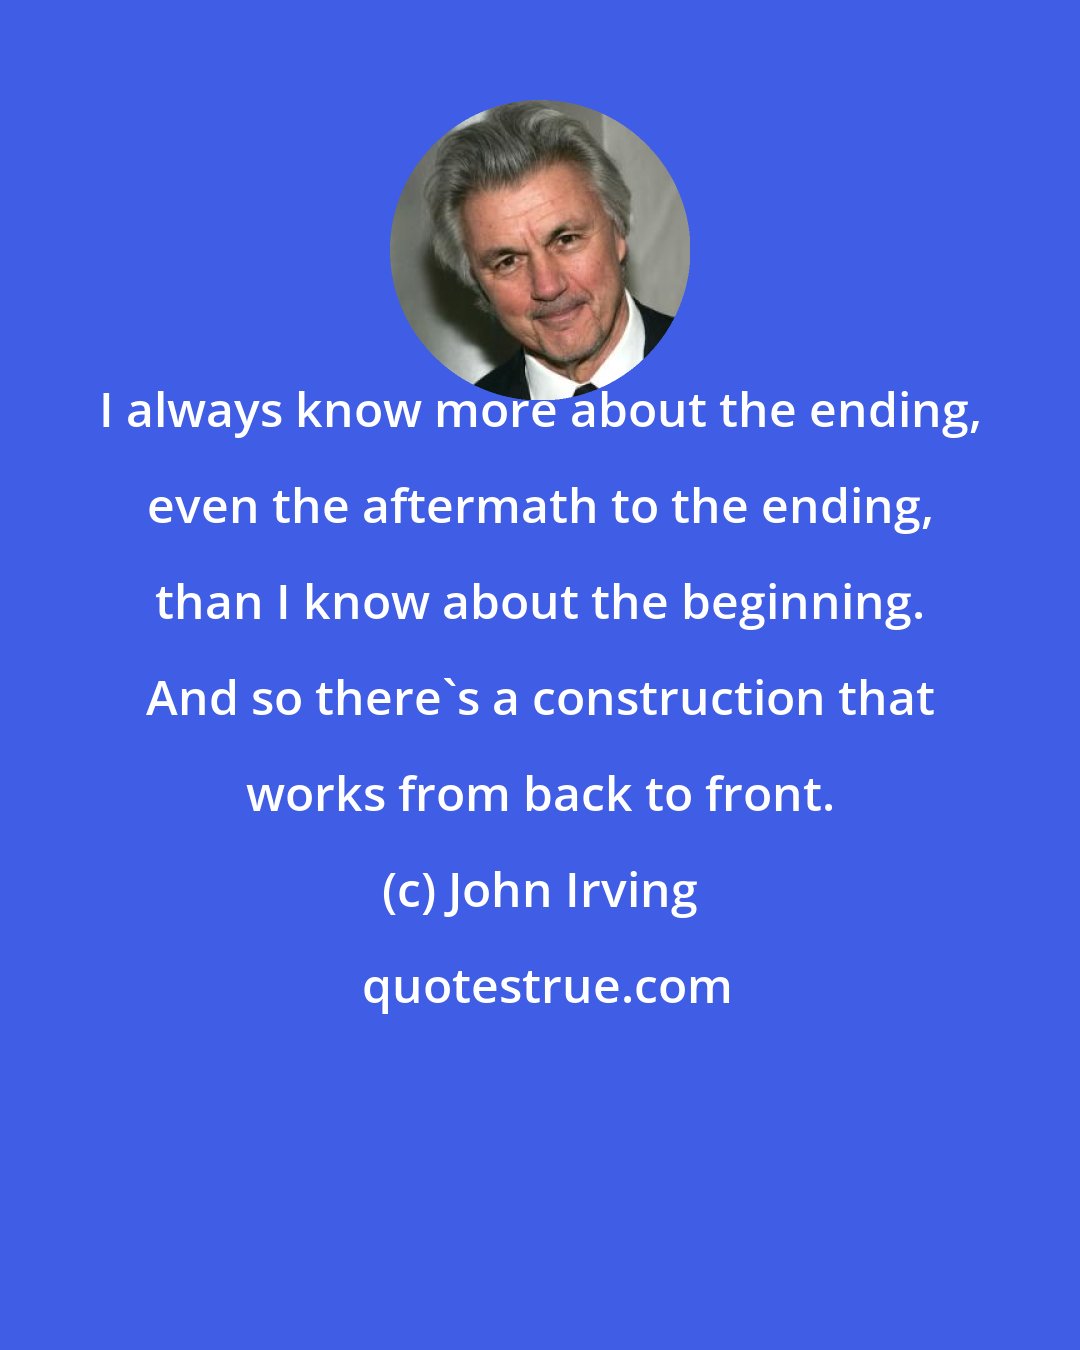 John Irving: I always know more about the ending, even the aftermath to the ending, than I know about the beginning. And so there's a construction that works from back to front.